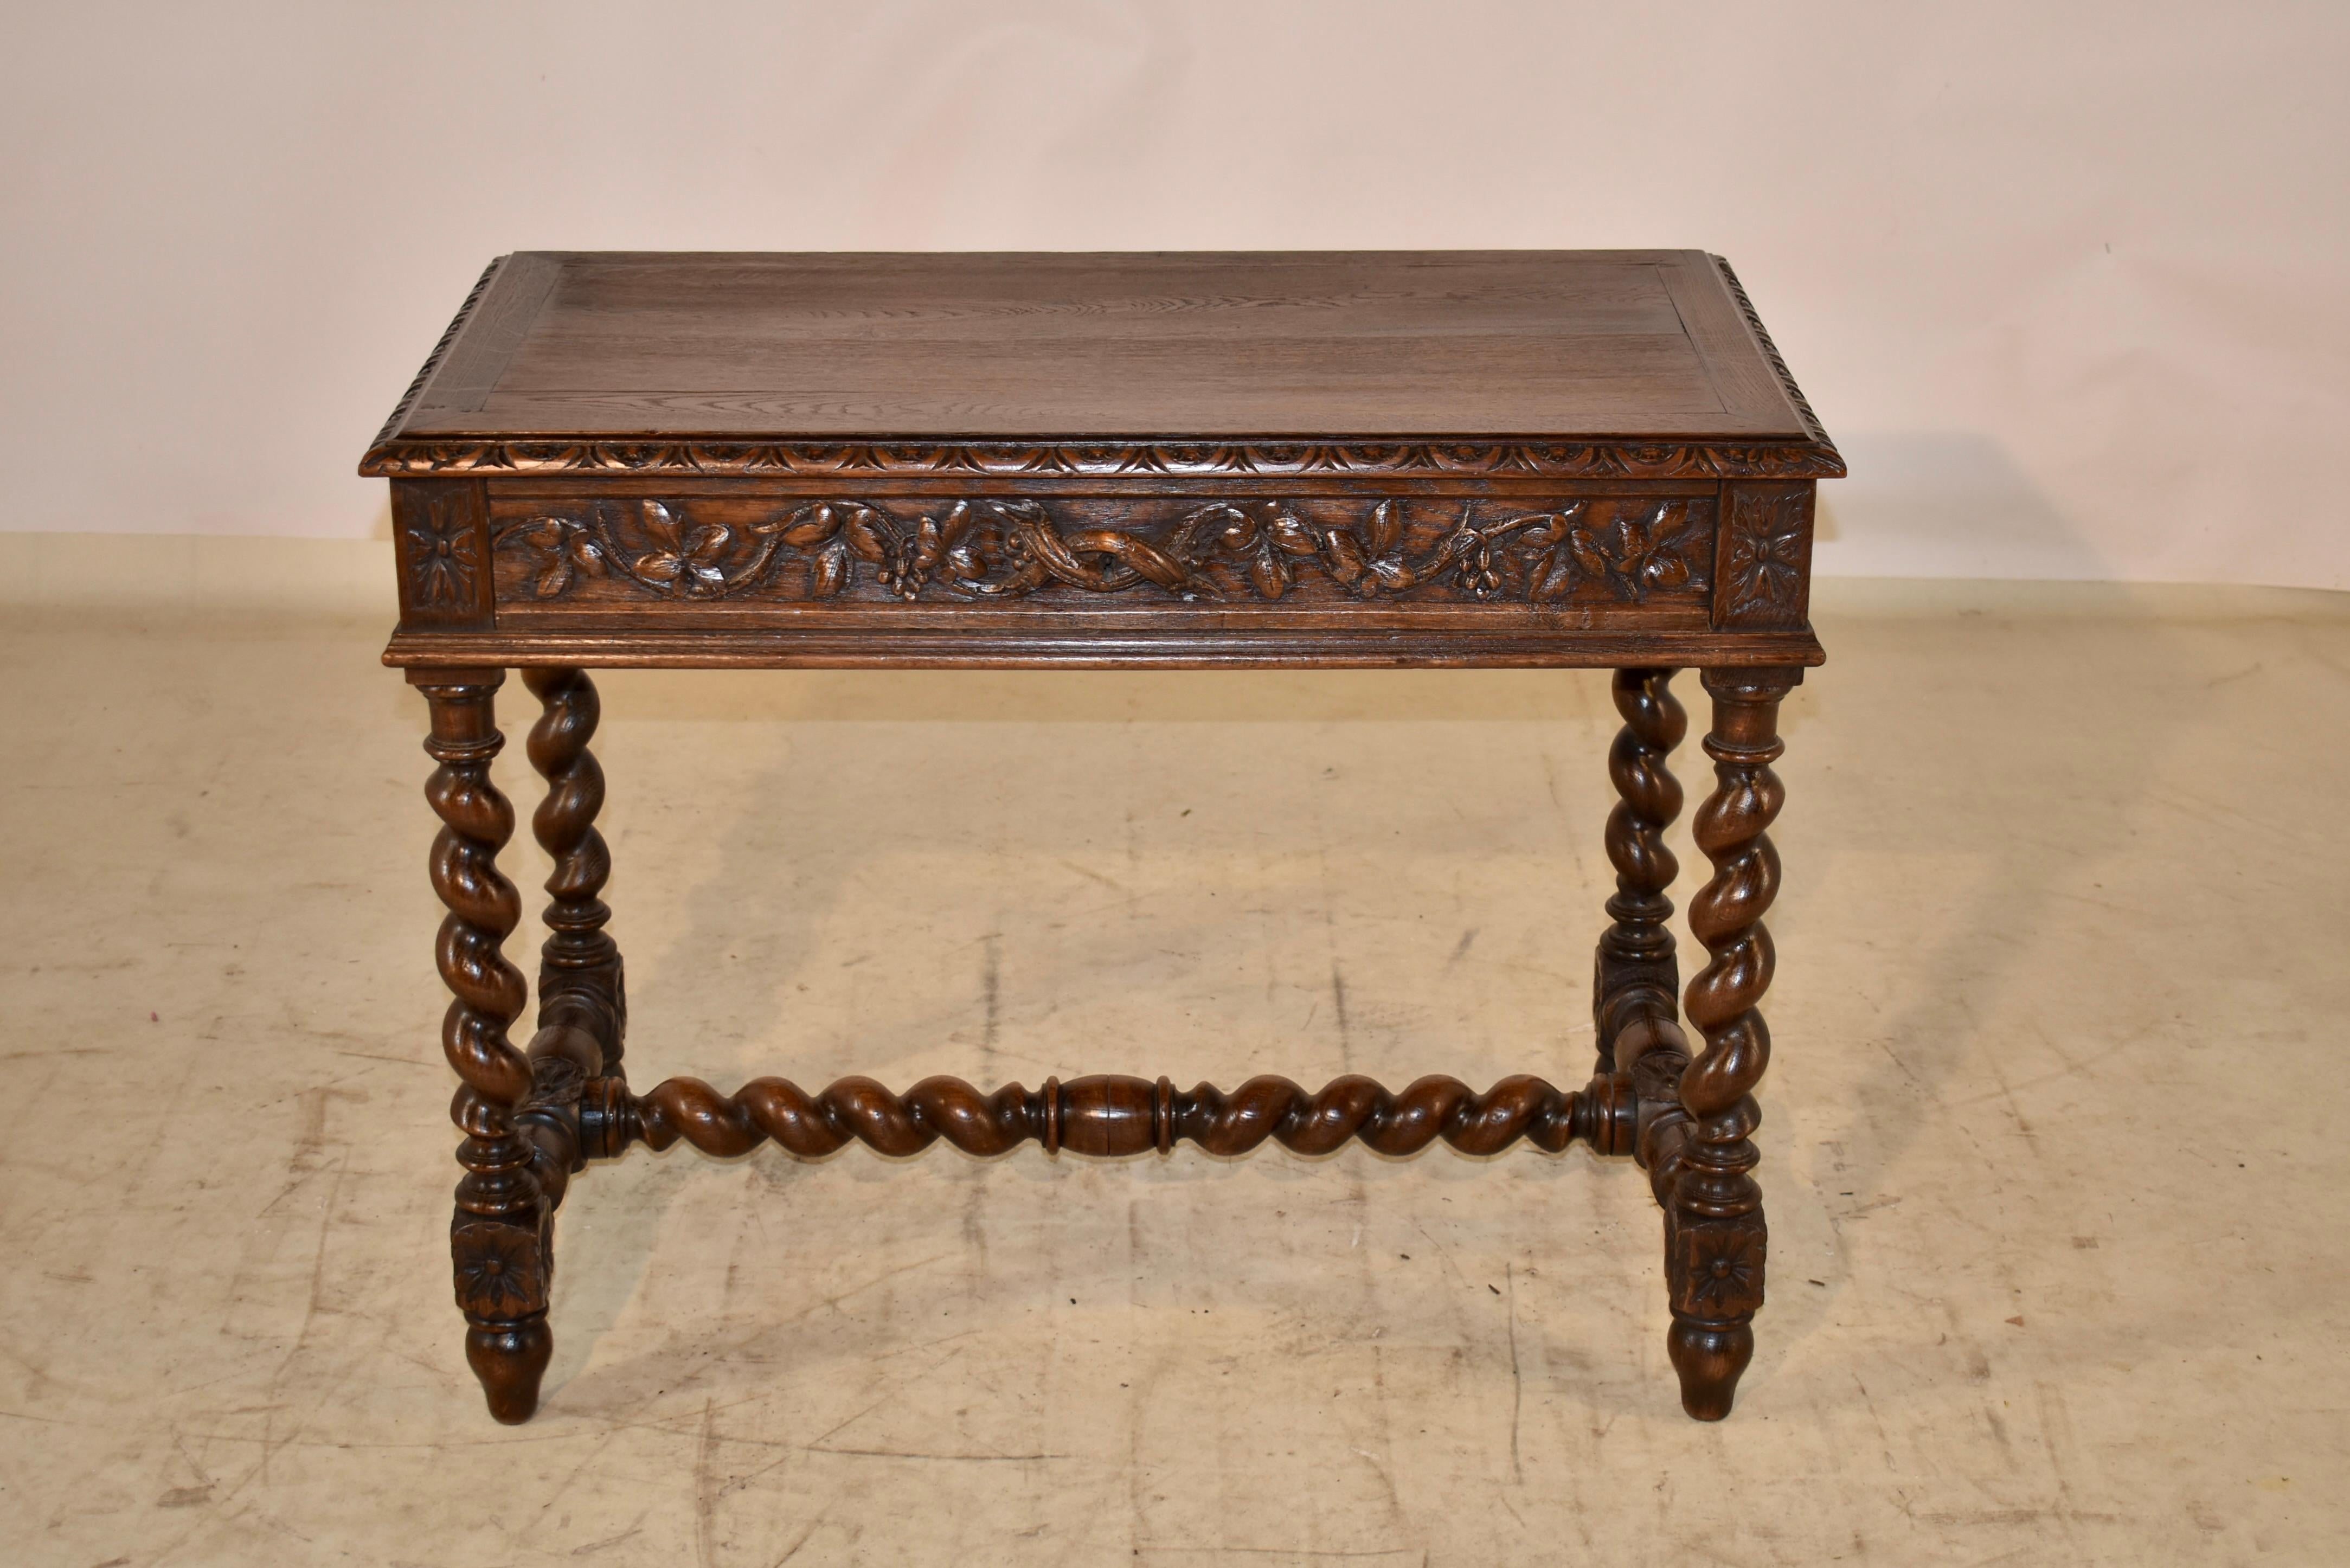 19th century Oak side or writing table from France. The top is banded and has a beveled and hand carved decorated edge. The apron is hand carved with leaves and vine decoration on all four sides for easy placement in any room. There is a single